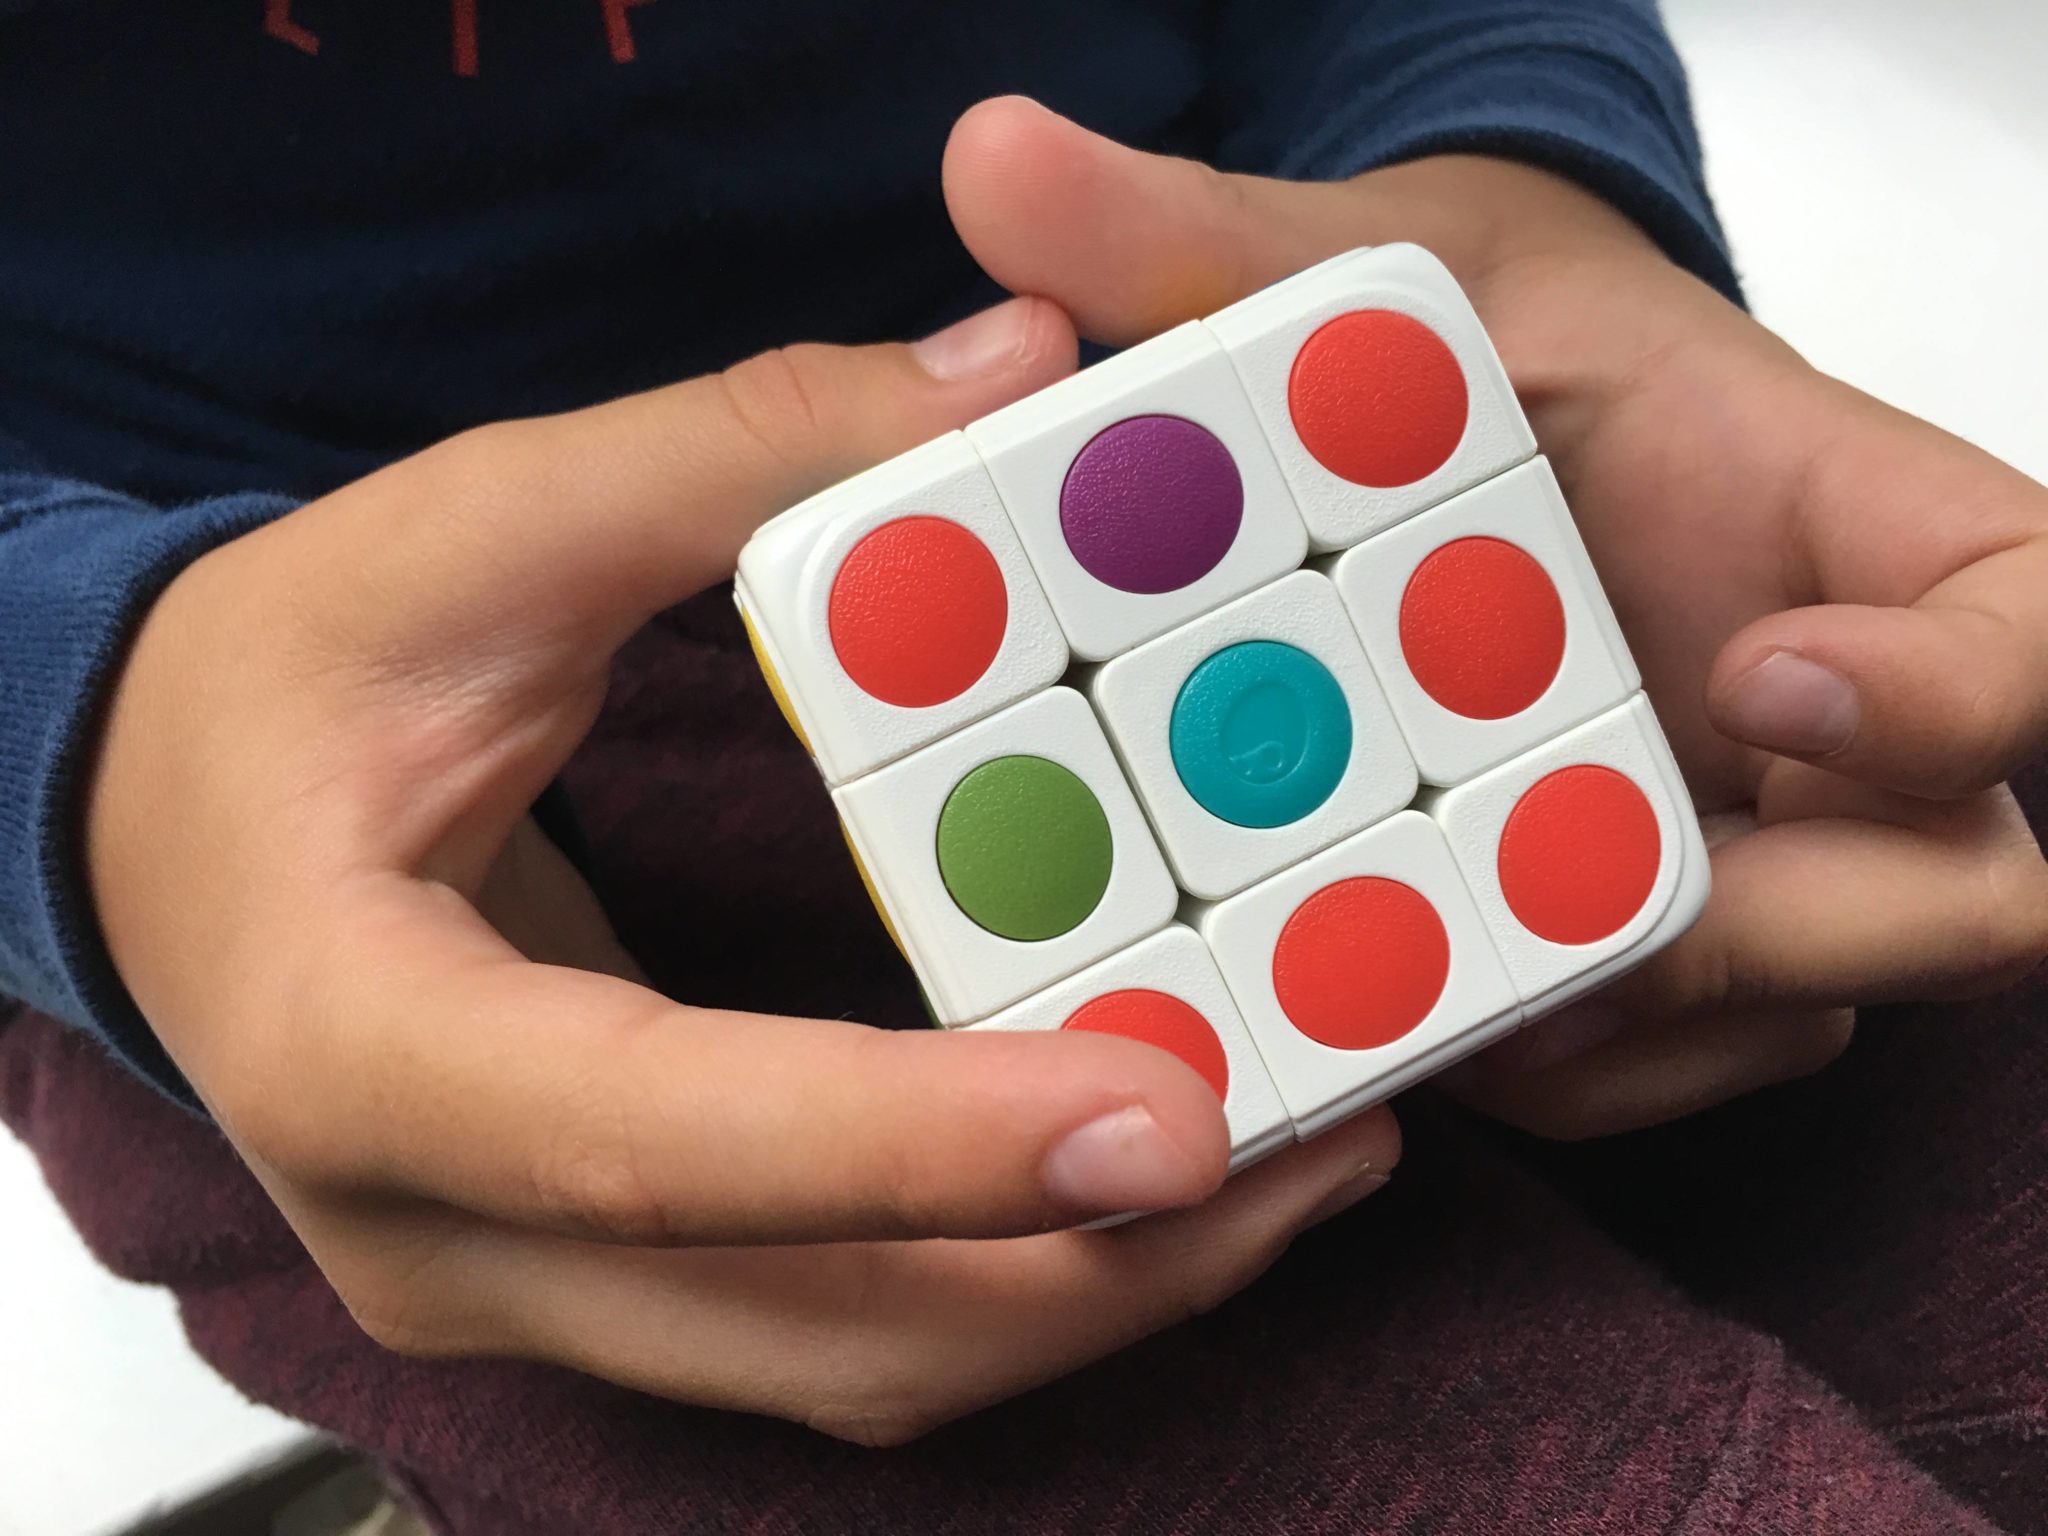 Ever been frustrated by the Rubik's Cube? Now you can enjoy solving the Rubik's Cube with Pai Technology's Cube-tastic! A reinvented 3D puzzle cube + AR app